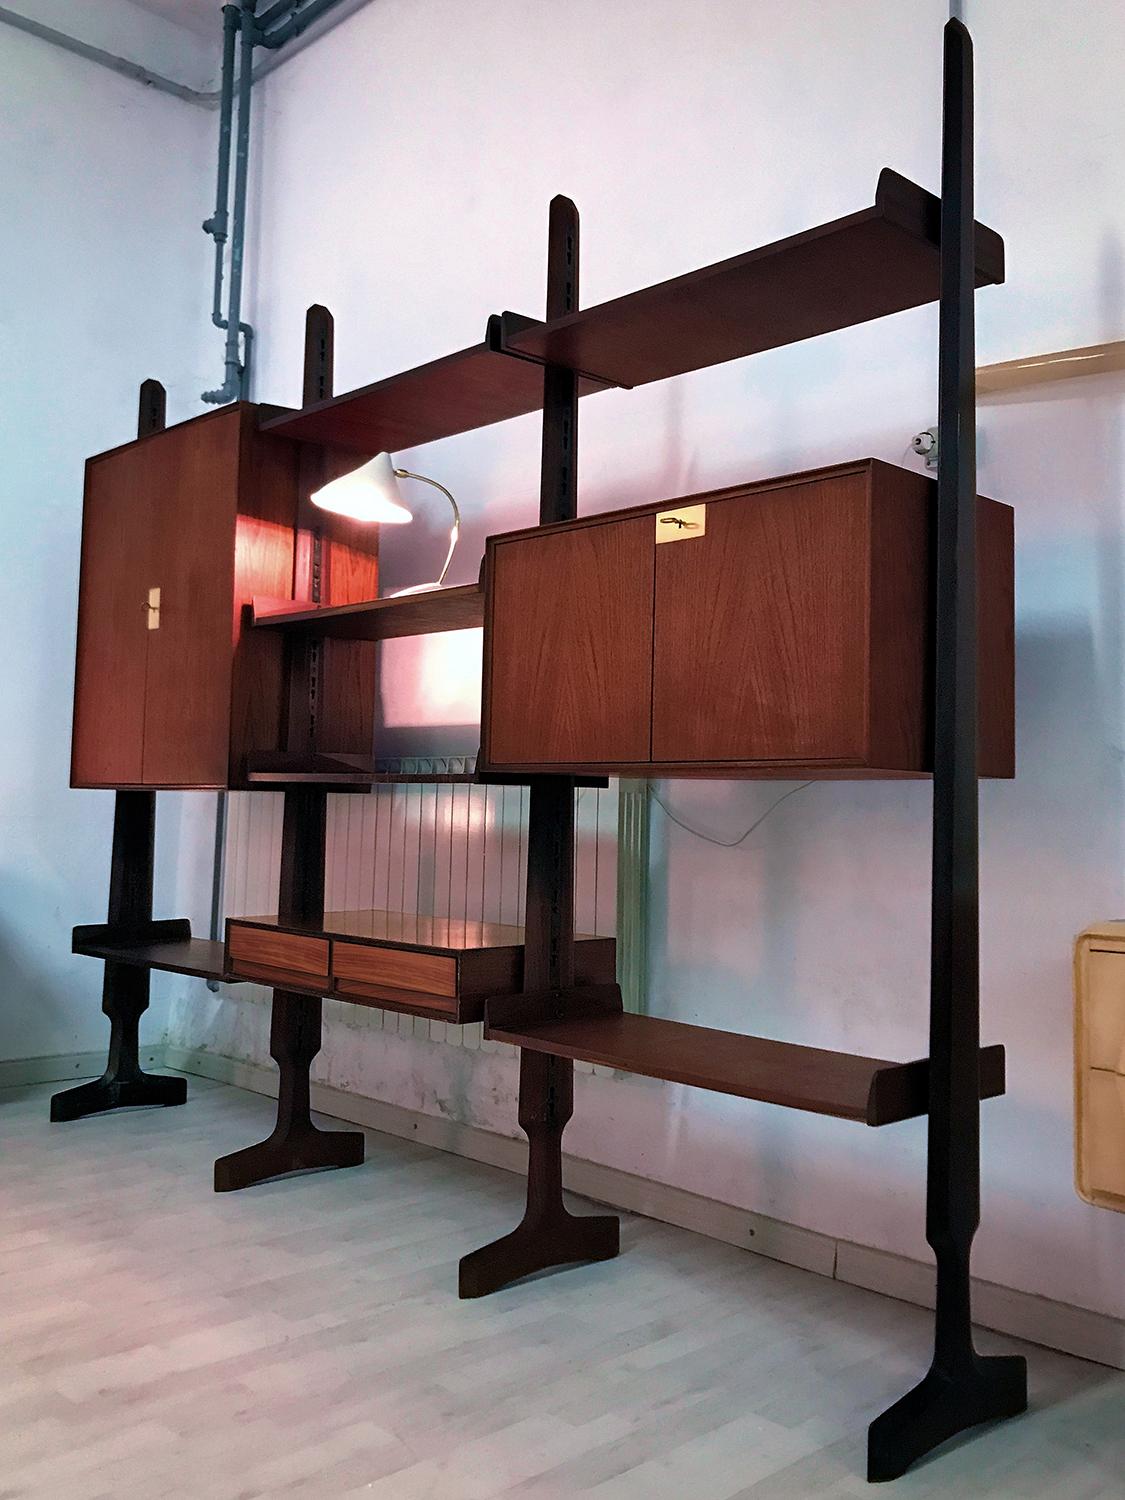 This bookcase is composed by three modules freestanding, suitable to be moving and placed at will in the home, equipped with six shelves, two cabinets with doors, and one cabinet with two drawers.
It's a versatile item that offers plenty of room for